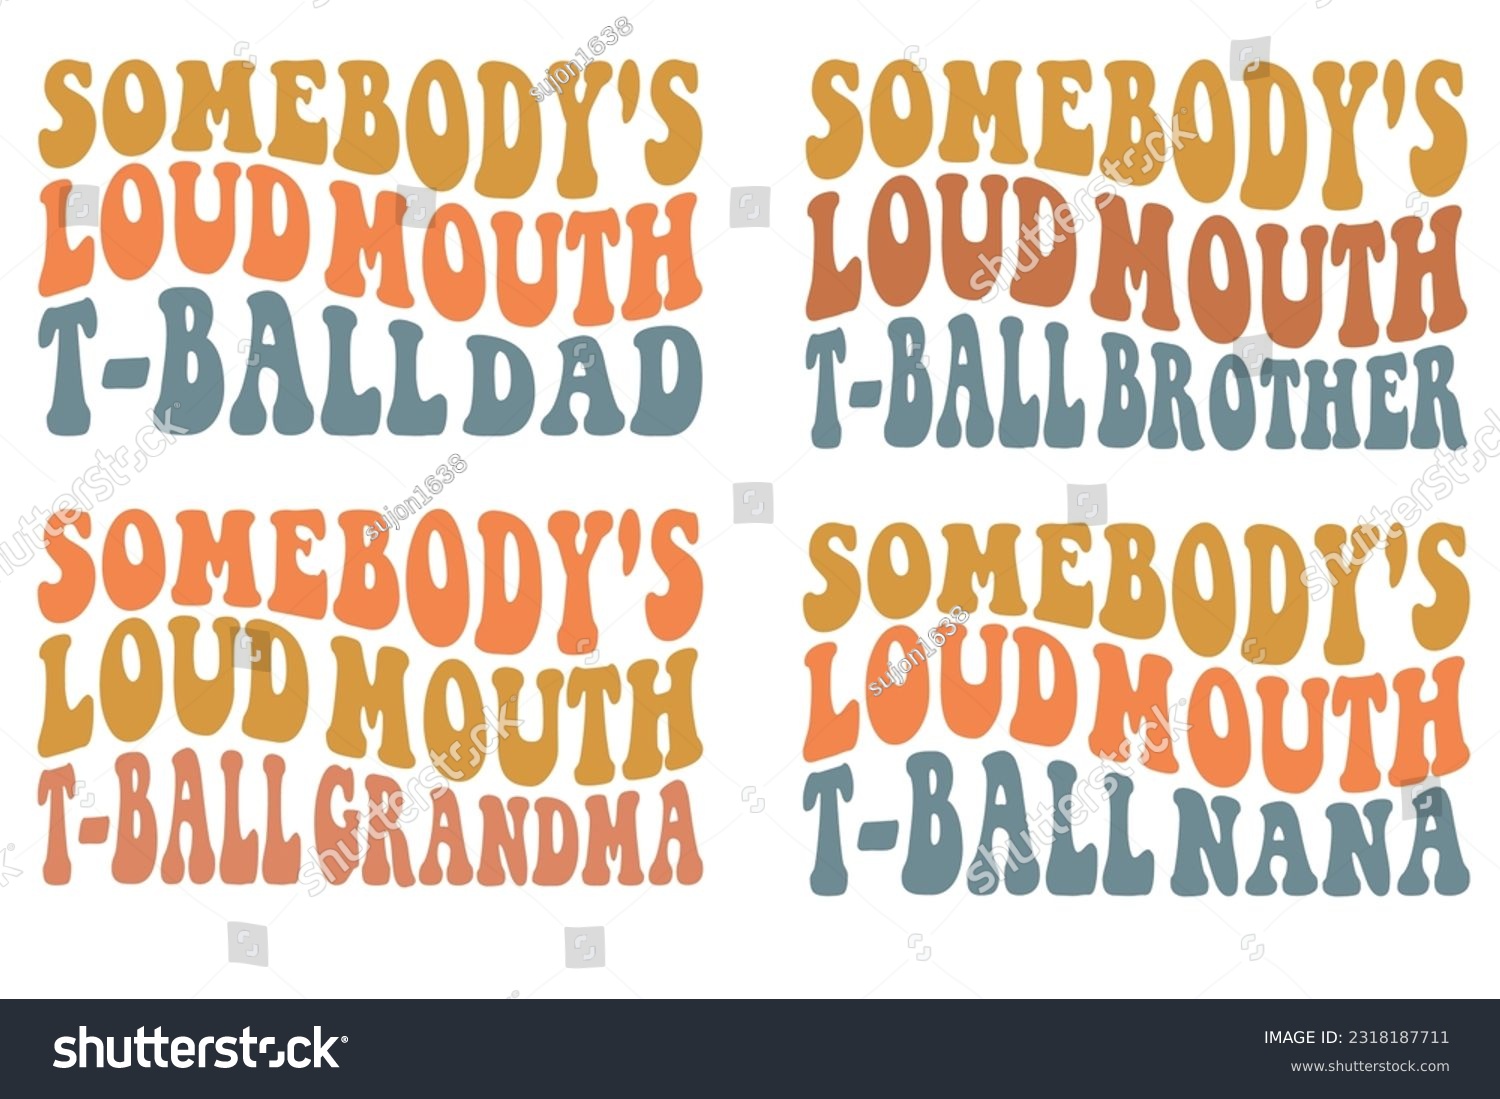 SVG of Somebody's loud mouth t-ball dad. Somebody's loud mouth t-ball brother, somebody's loud mouth t-ball grandma, somebody's loud mouth t-ball Nana retro wavy SVG bundle T-shirt svg